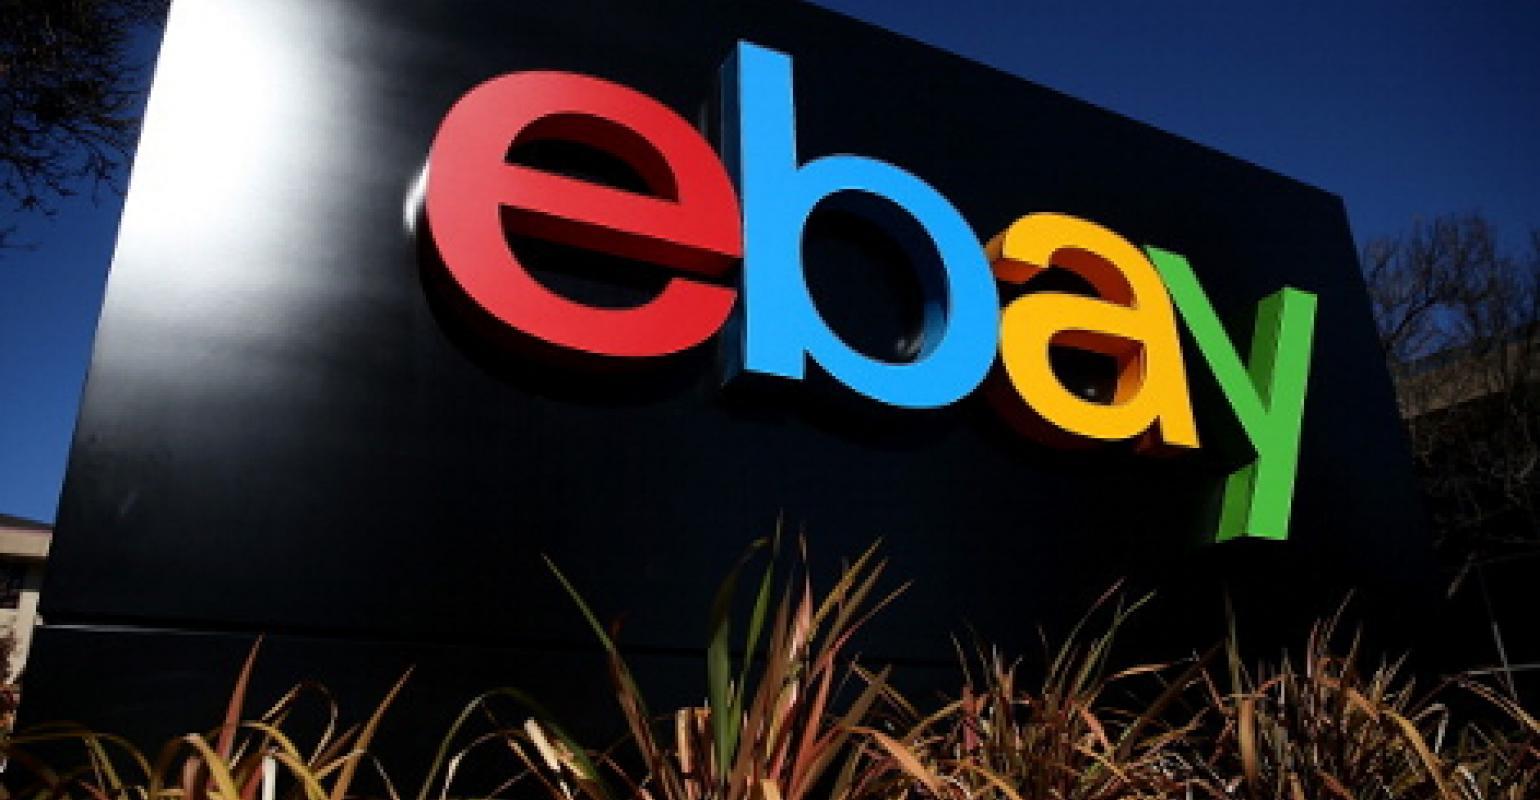 Supernap Logo - eBay May Build Reno Data Center Beside Leased Space at Switch ...